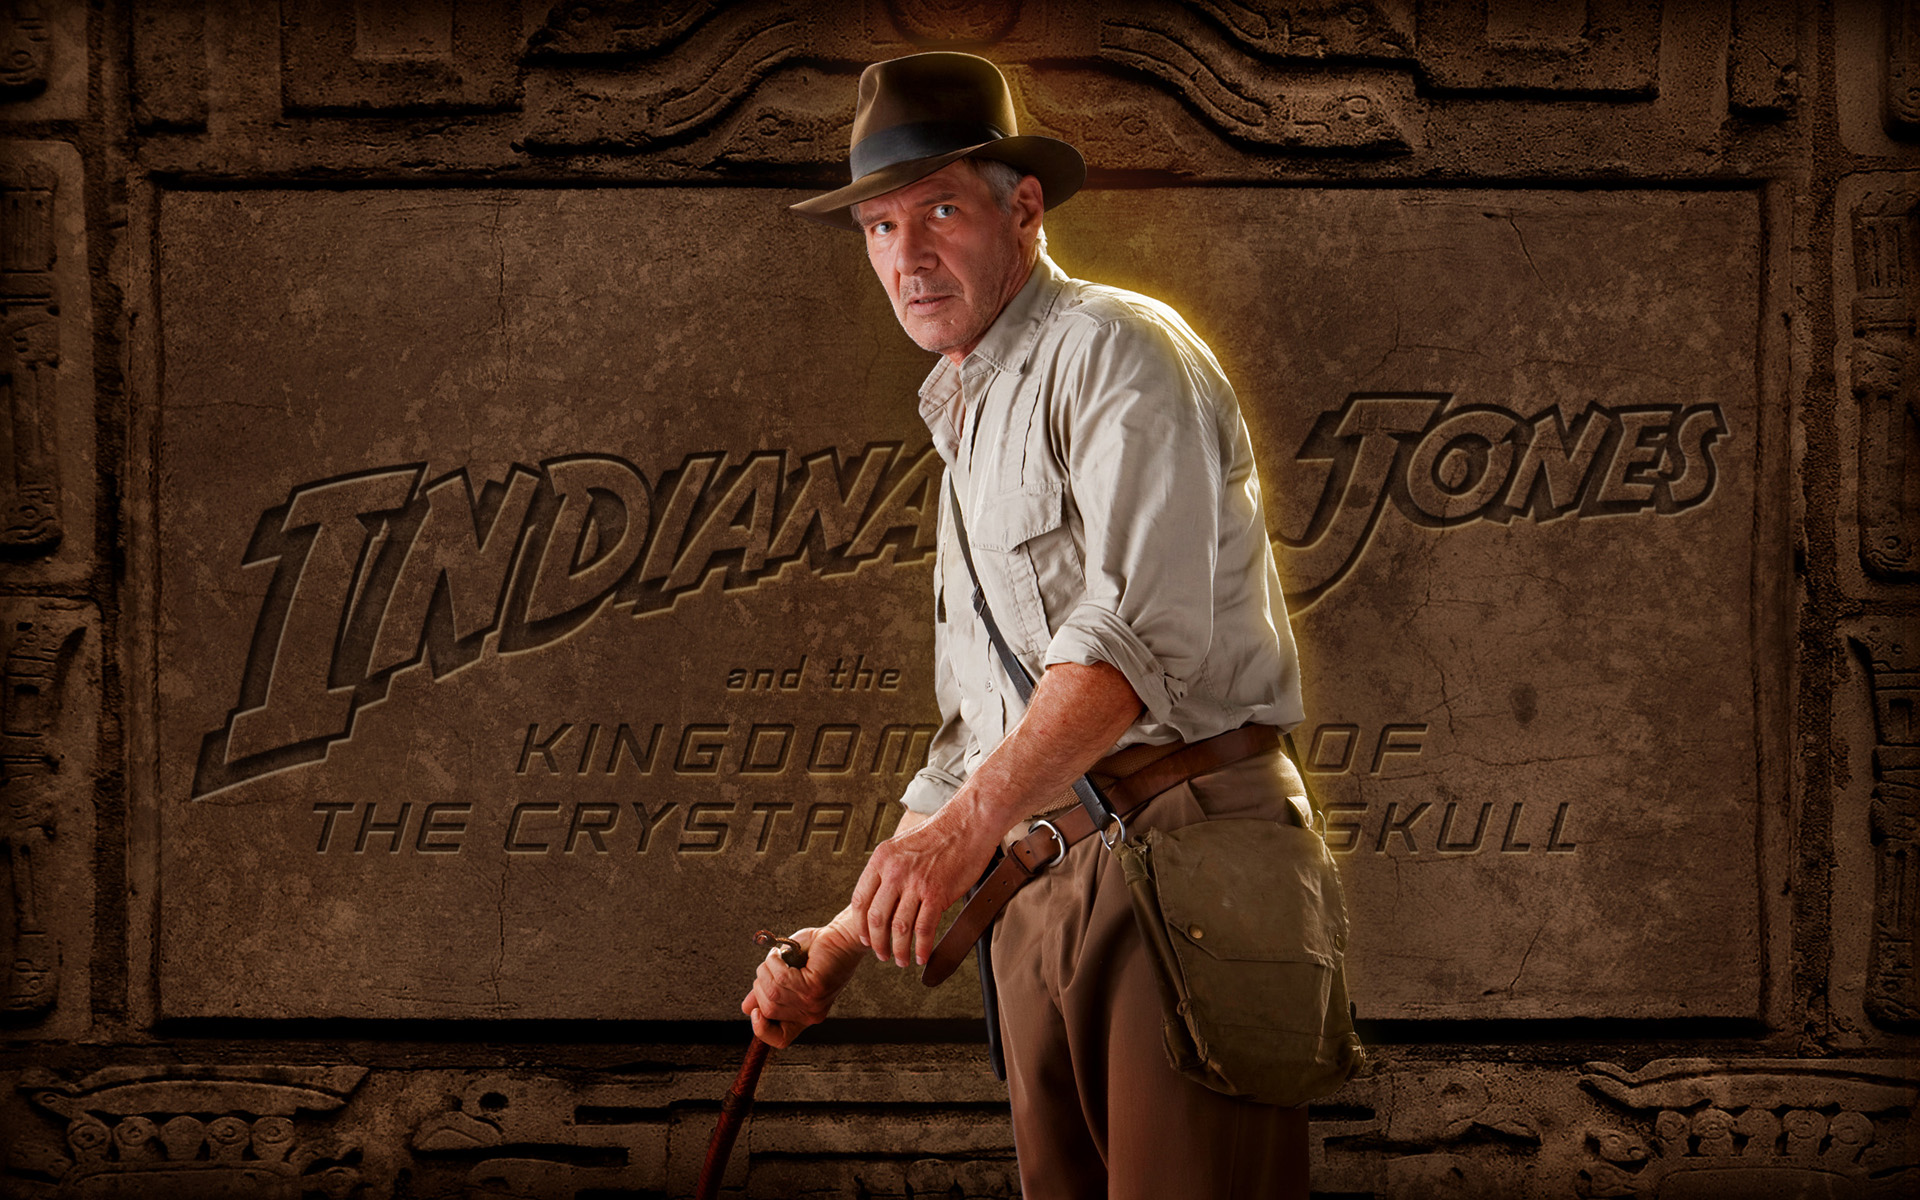 Archaeologist Indiana Jones wallpapers and images - wallpapers ...